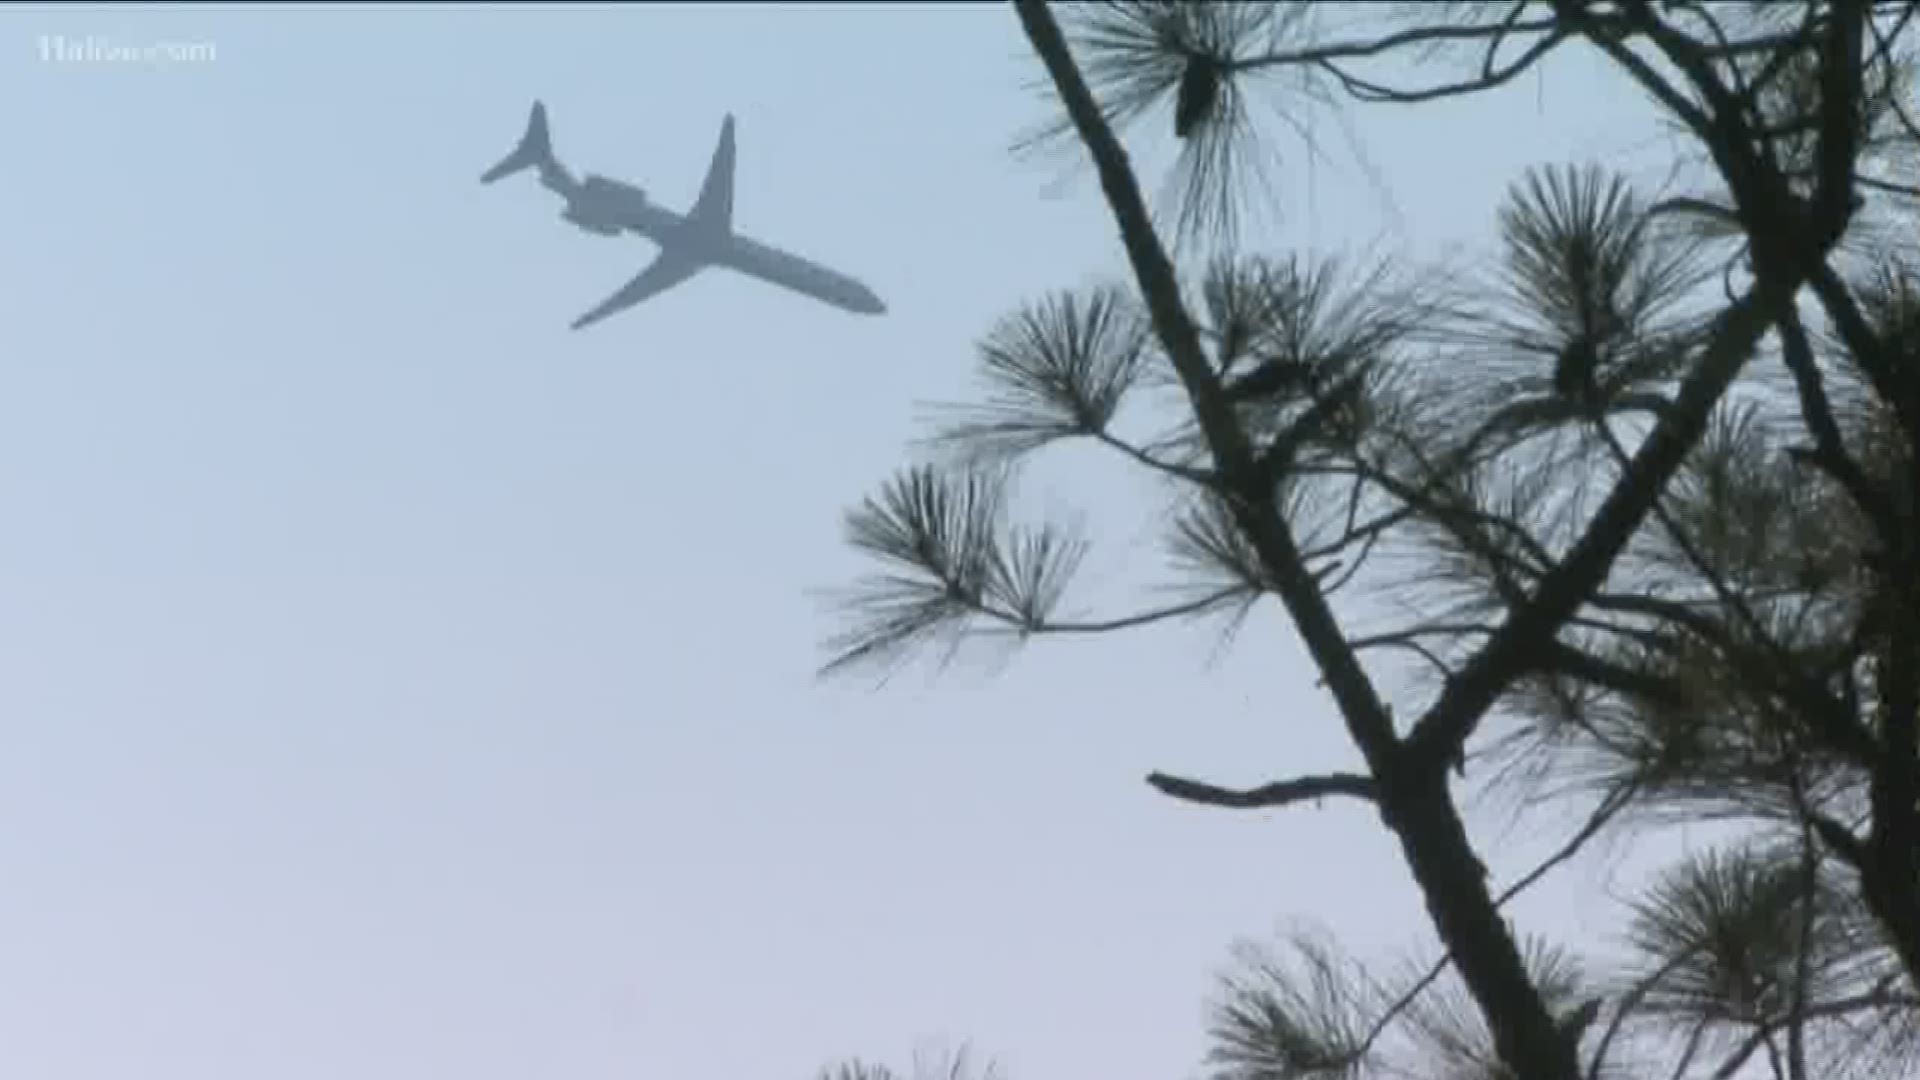 The Federal Aviation Administration says flight paths haven't changed in two years.